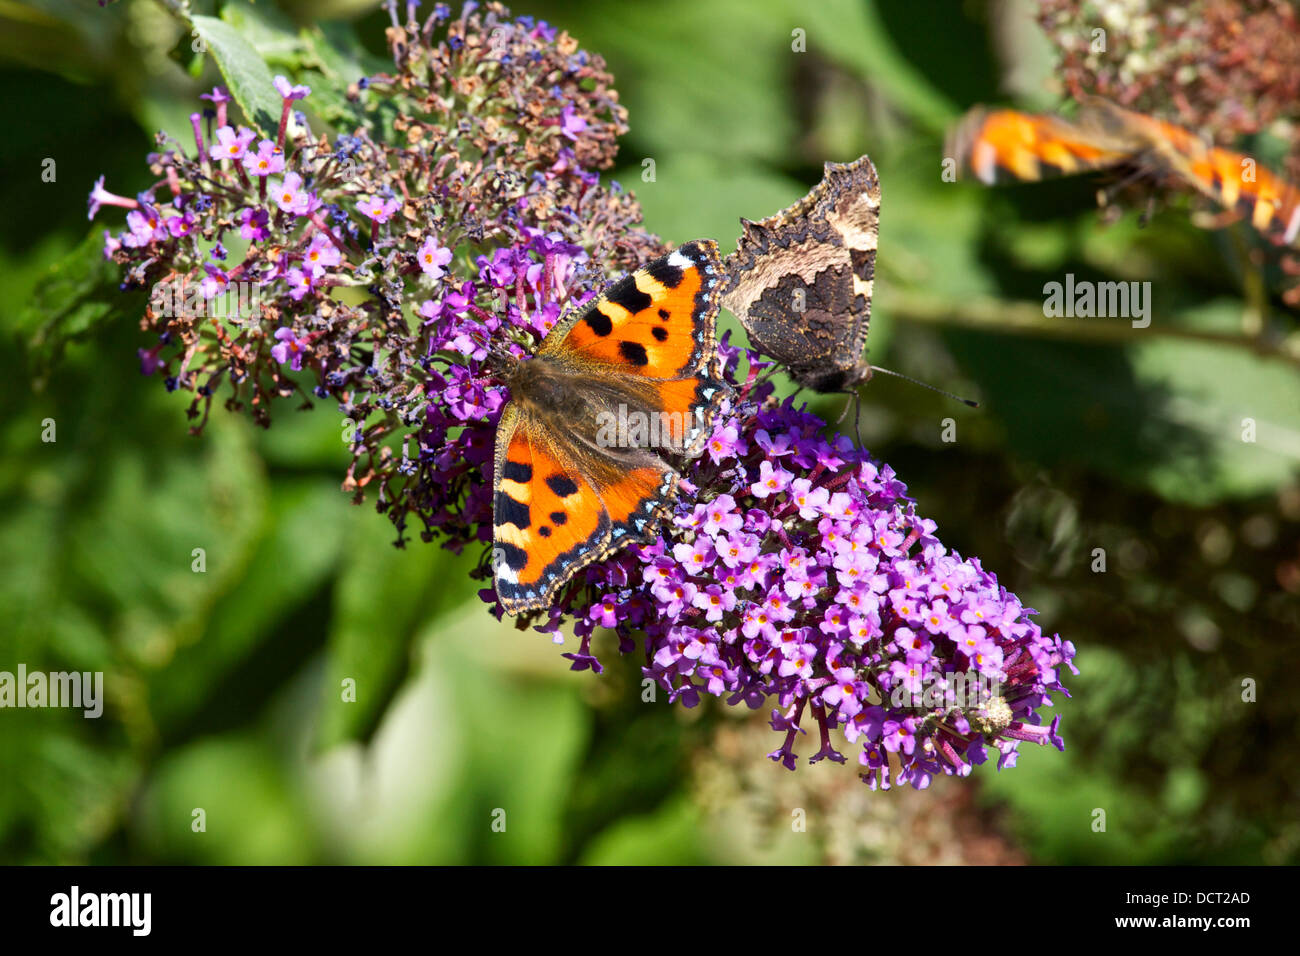 Faversham Kent UK - 21 August 2013 : The continuing good weather in the south east proves a blessing for the butterflies. The Small Tortoiseshell (Aglais urticae) has been on the decline in the UK in recent years. Two are seen here on a Buddleia. Stock Photo